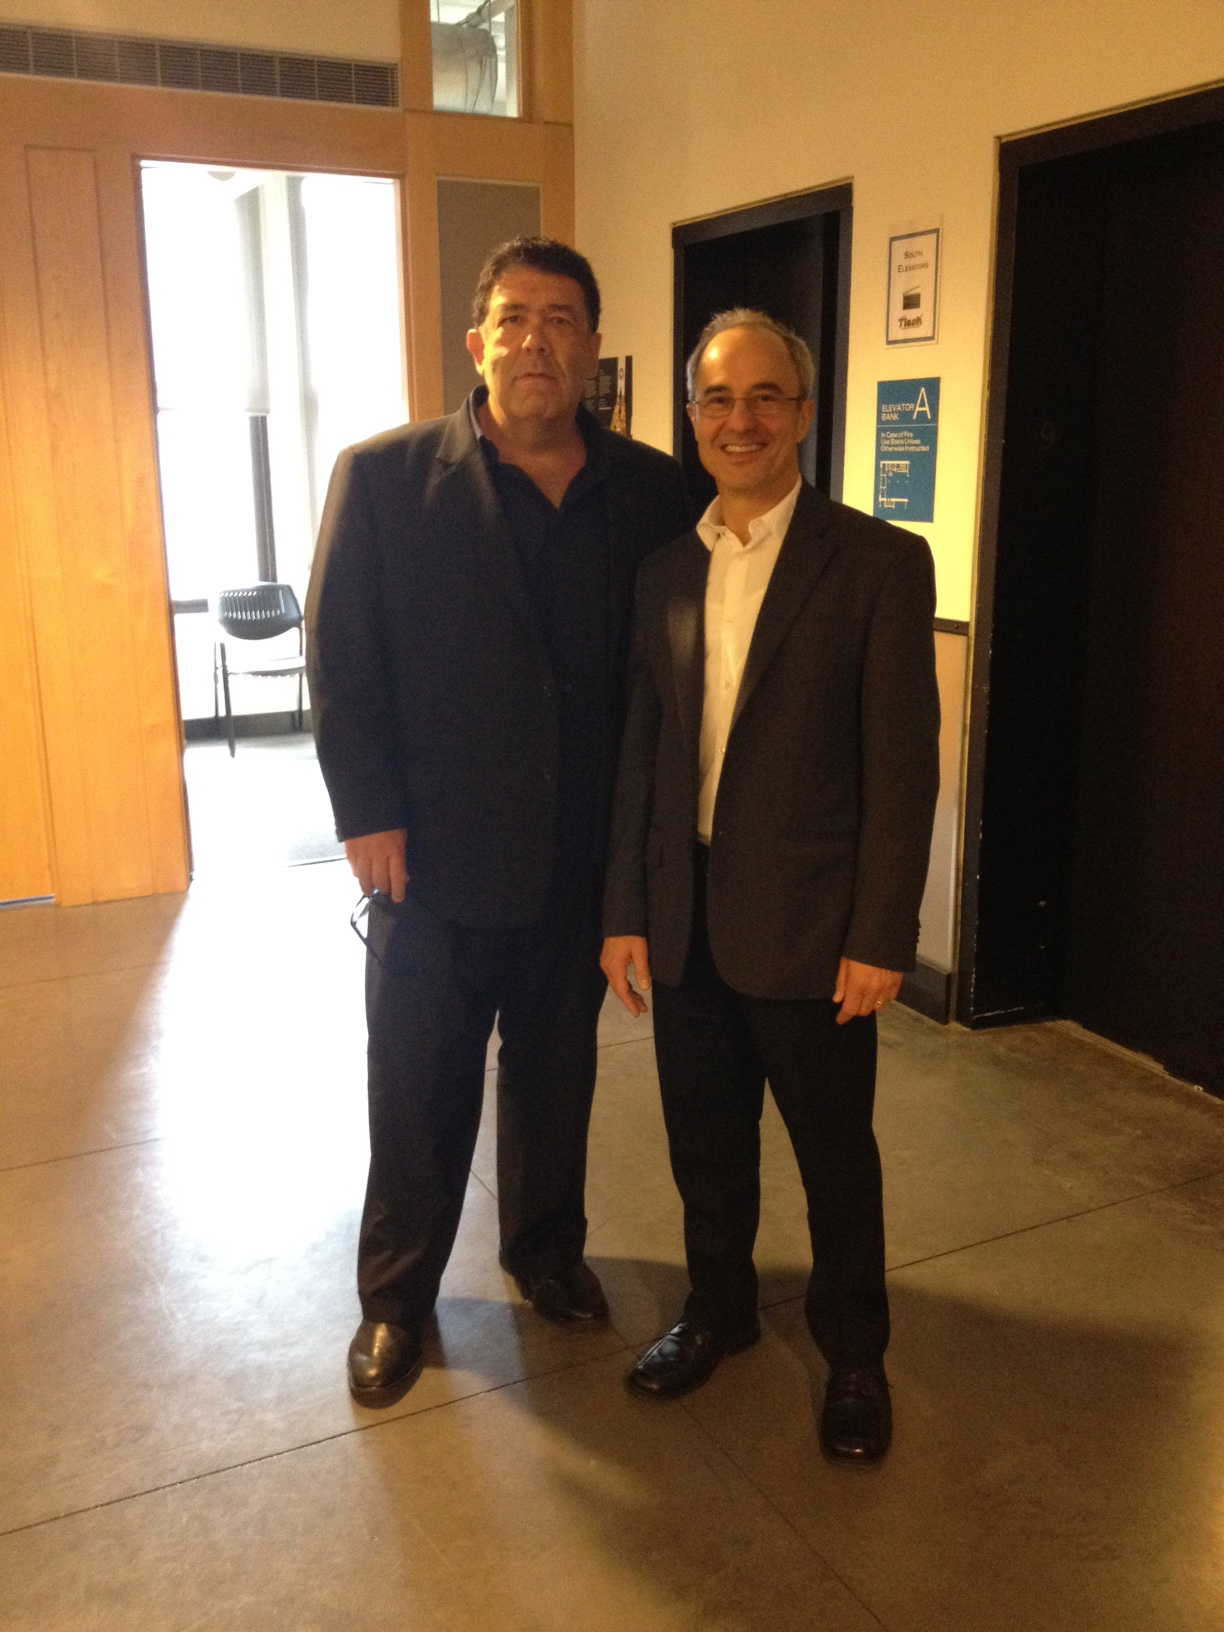 Producer Victorino Noval with John Tintori, Chair of the Graduate Film department at NYU.